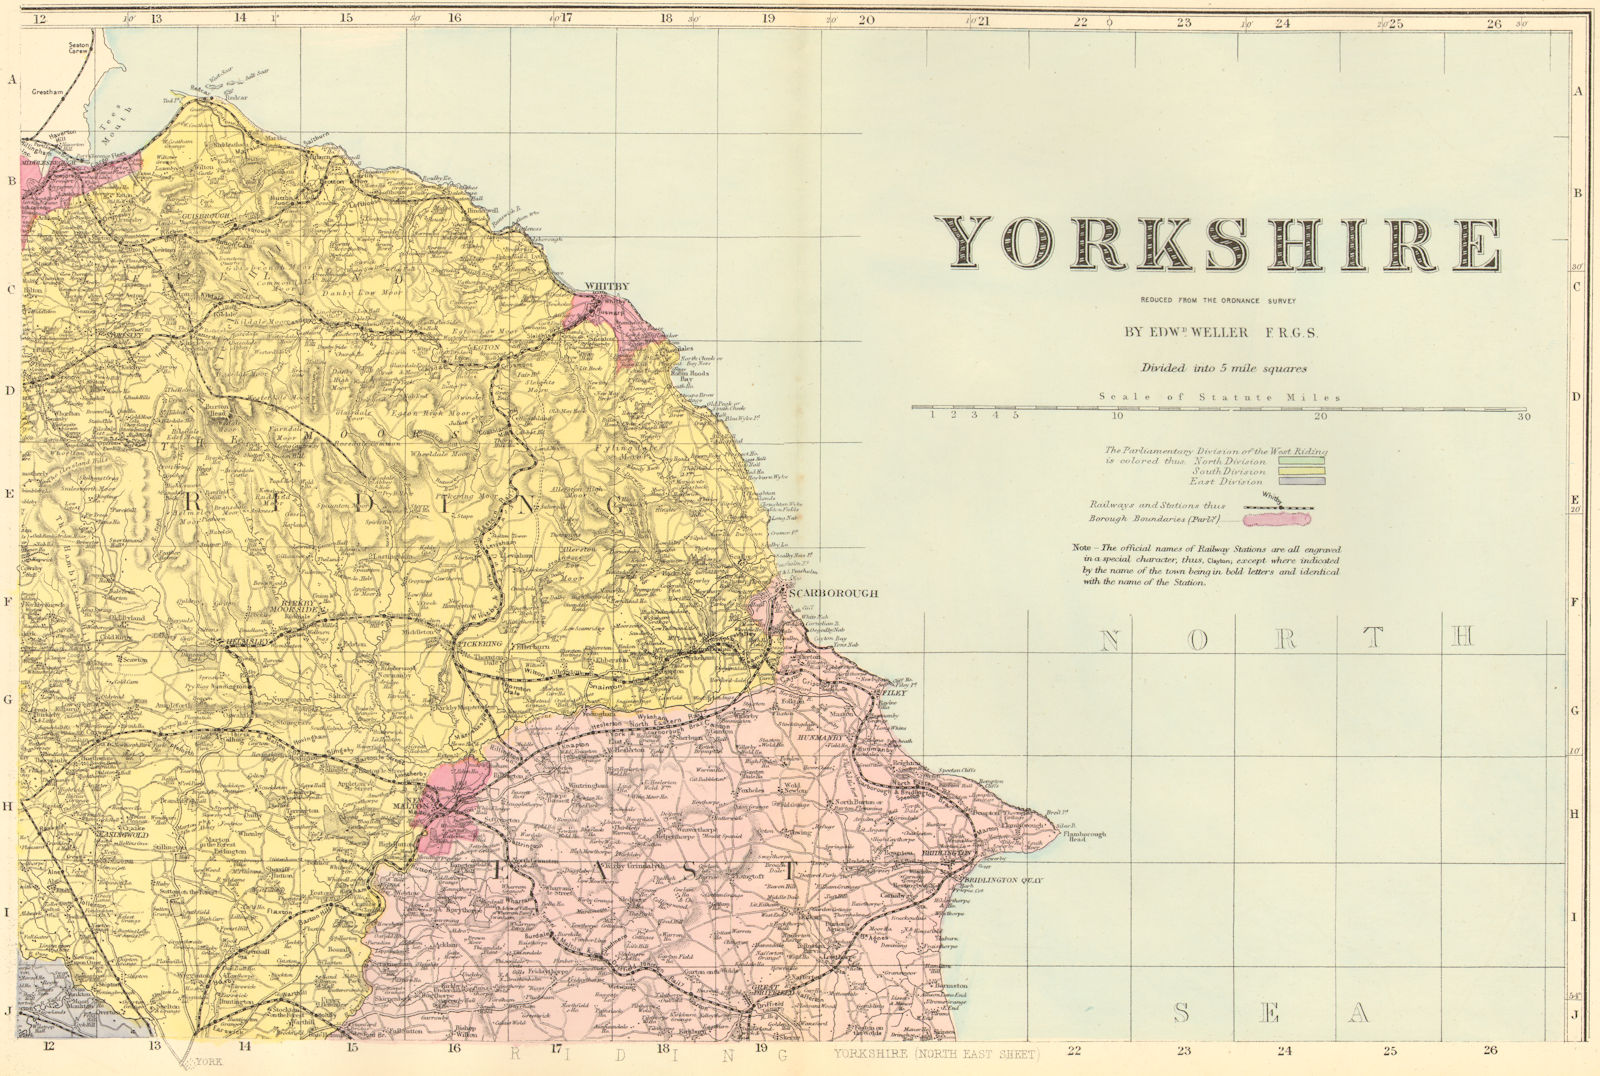 YORKSHIRE (North East). Scarborough Whitby. Antique county map by GW BACON 1884